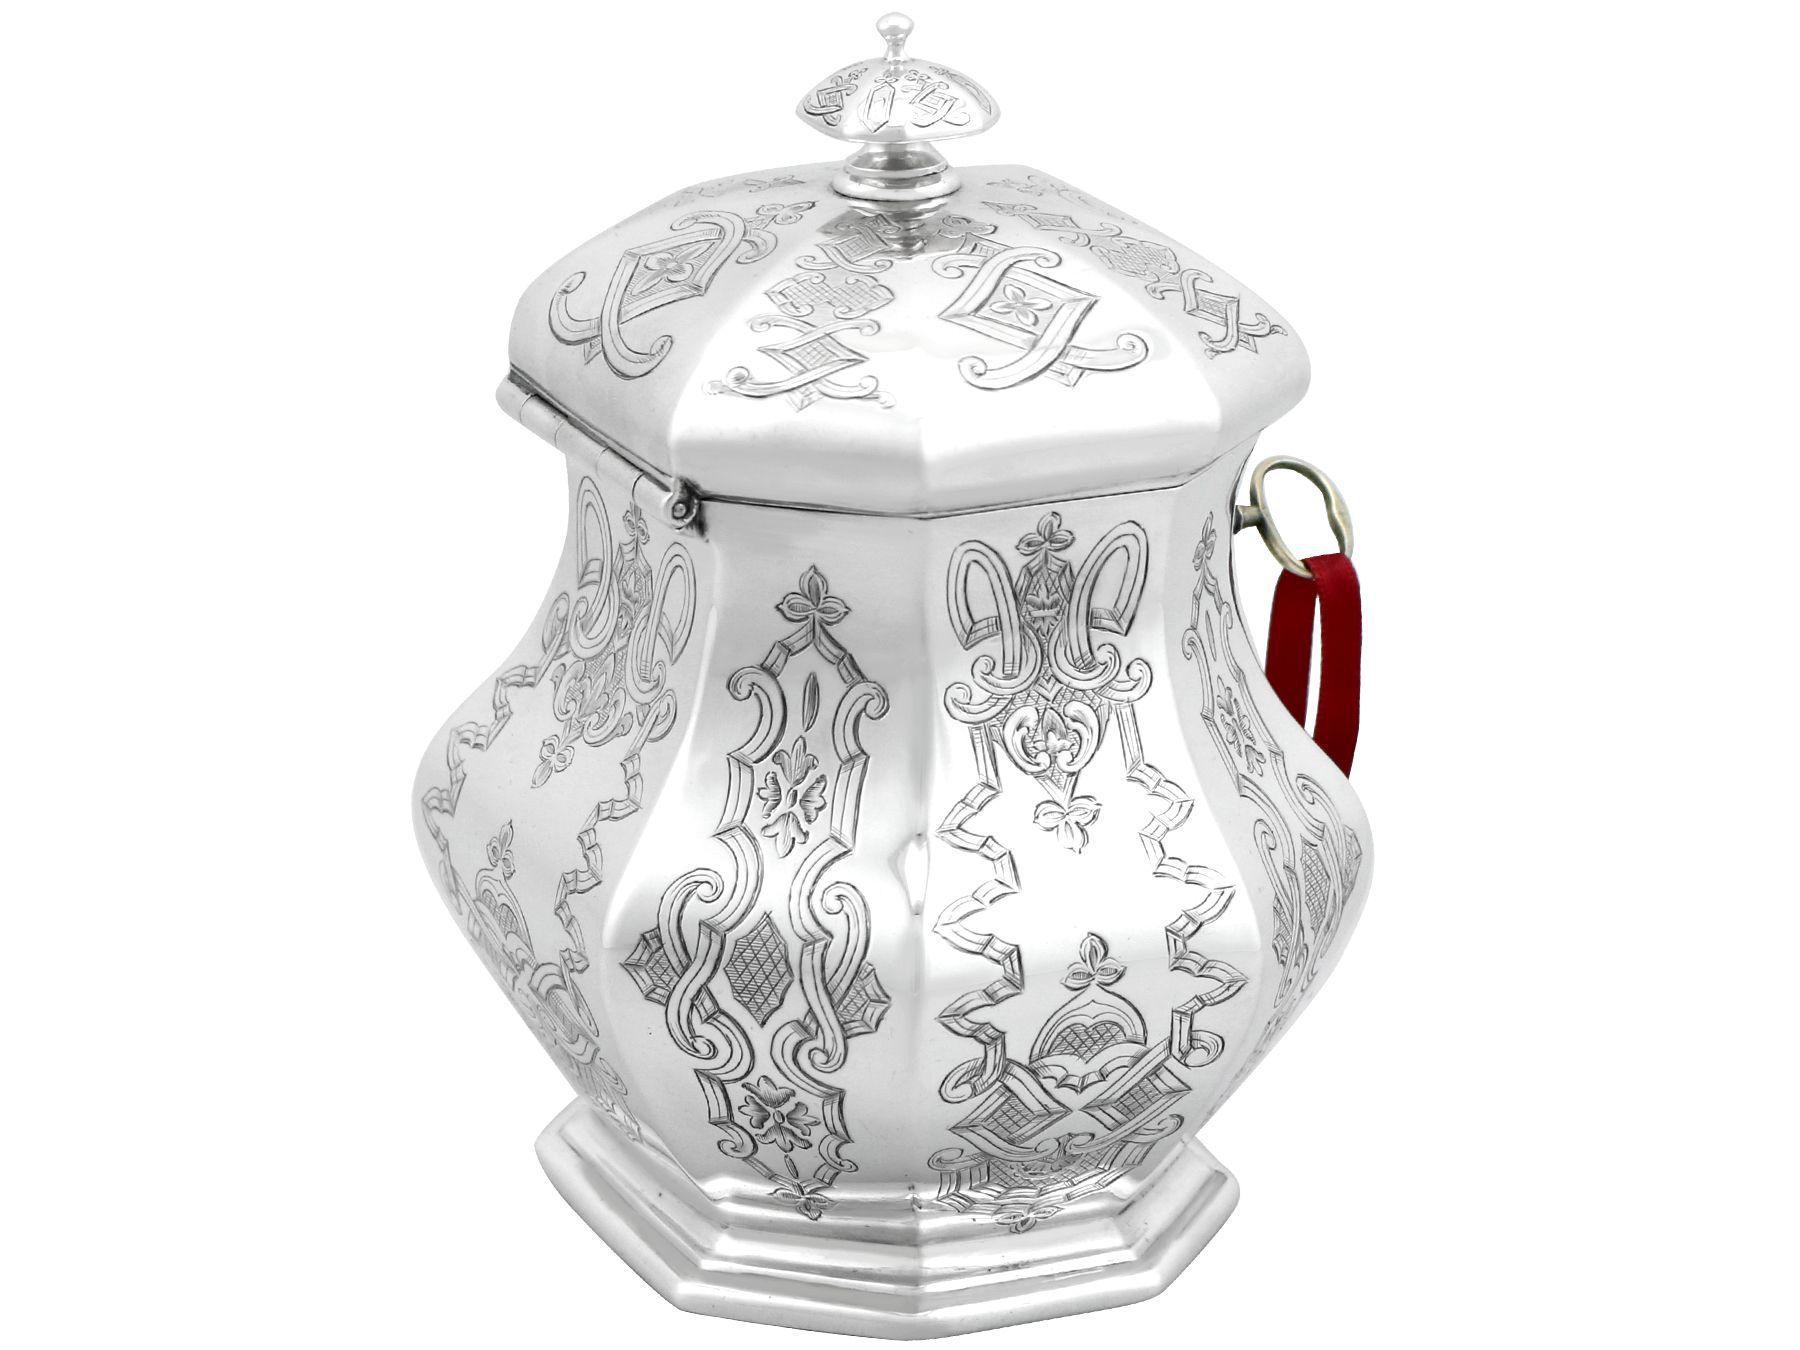 An exceptional, fine and impressive, antique early Victorian English sterling silver locking tea caddy; an addition to our silver teaware collection.

This exceptional antique Victorian sterling silver tea caddy has an octagonal panelled, baluster